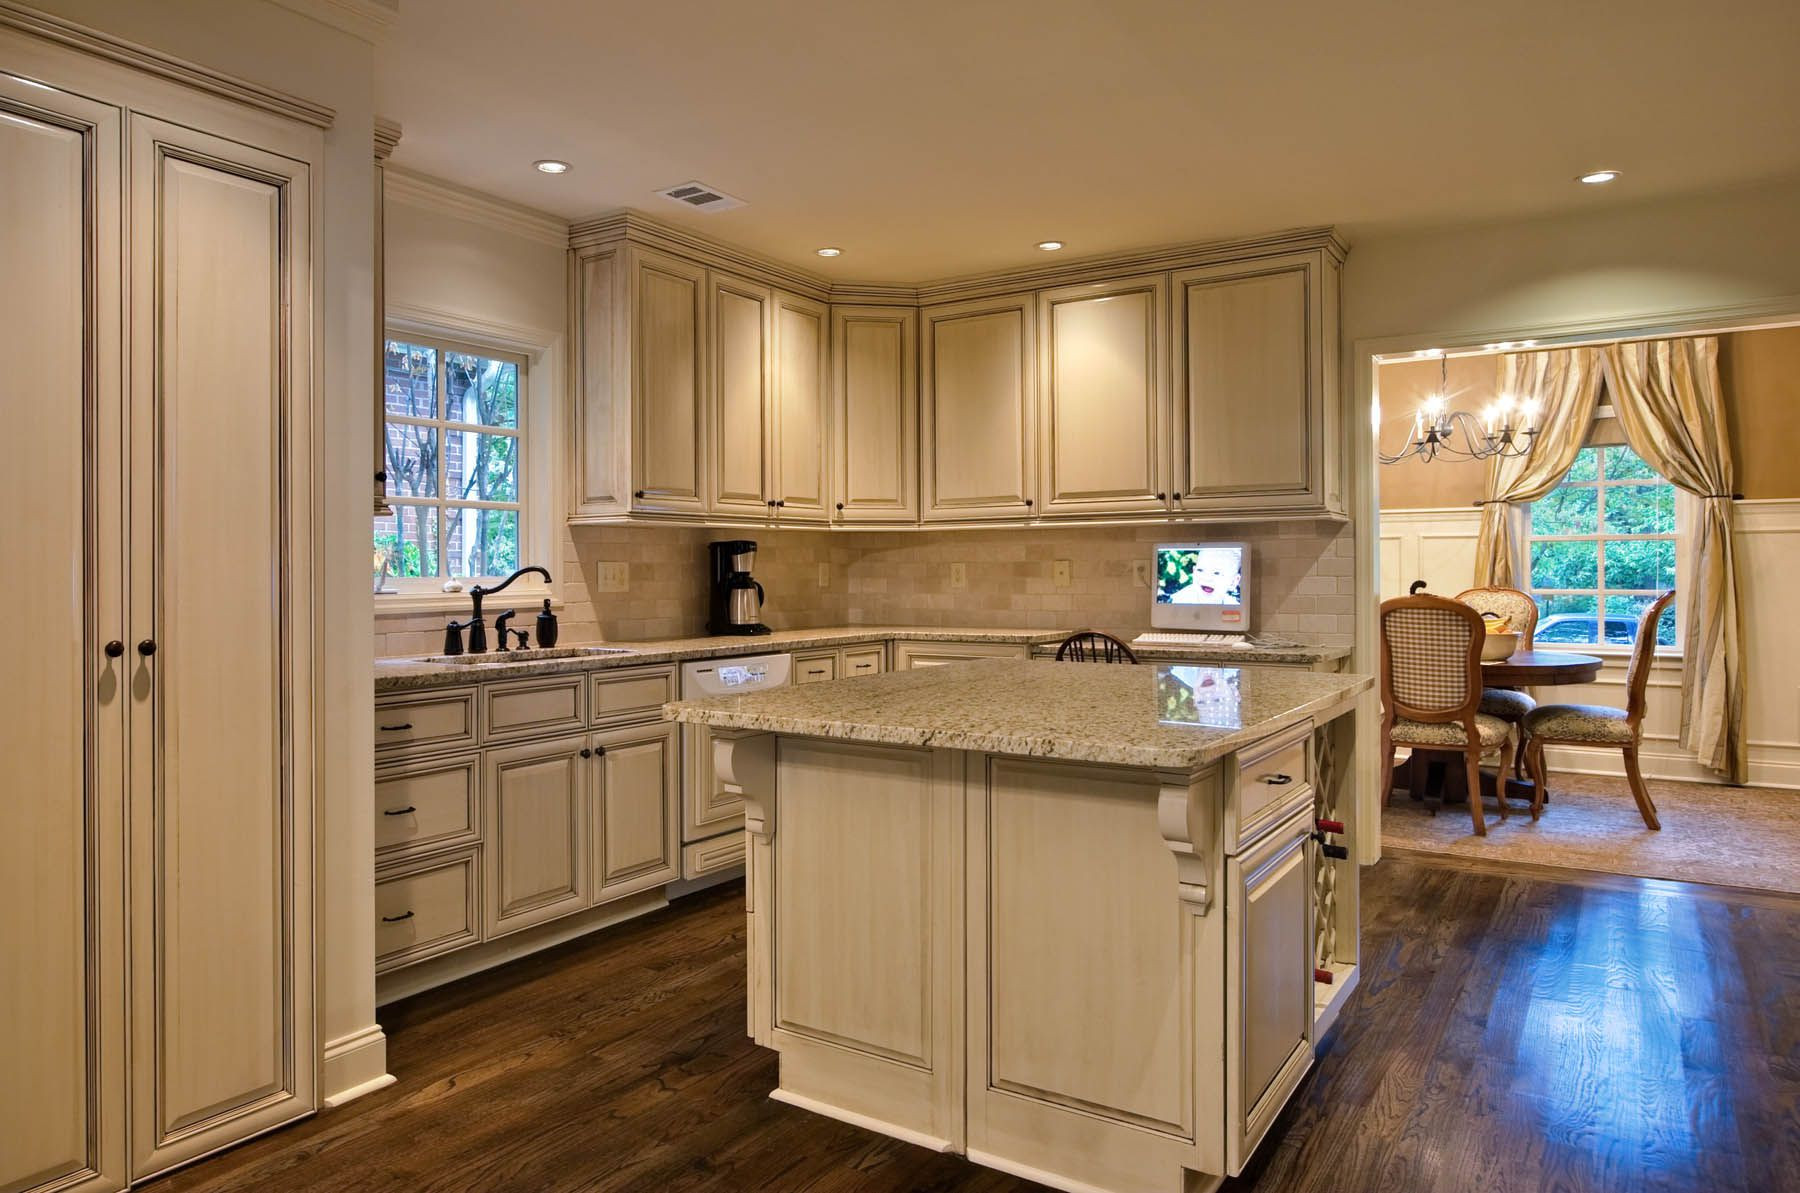 Home Depot Kitchen Remodel Estimator
 How to Remodel Your Kitchen Design with Home Depot Service